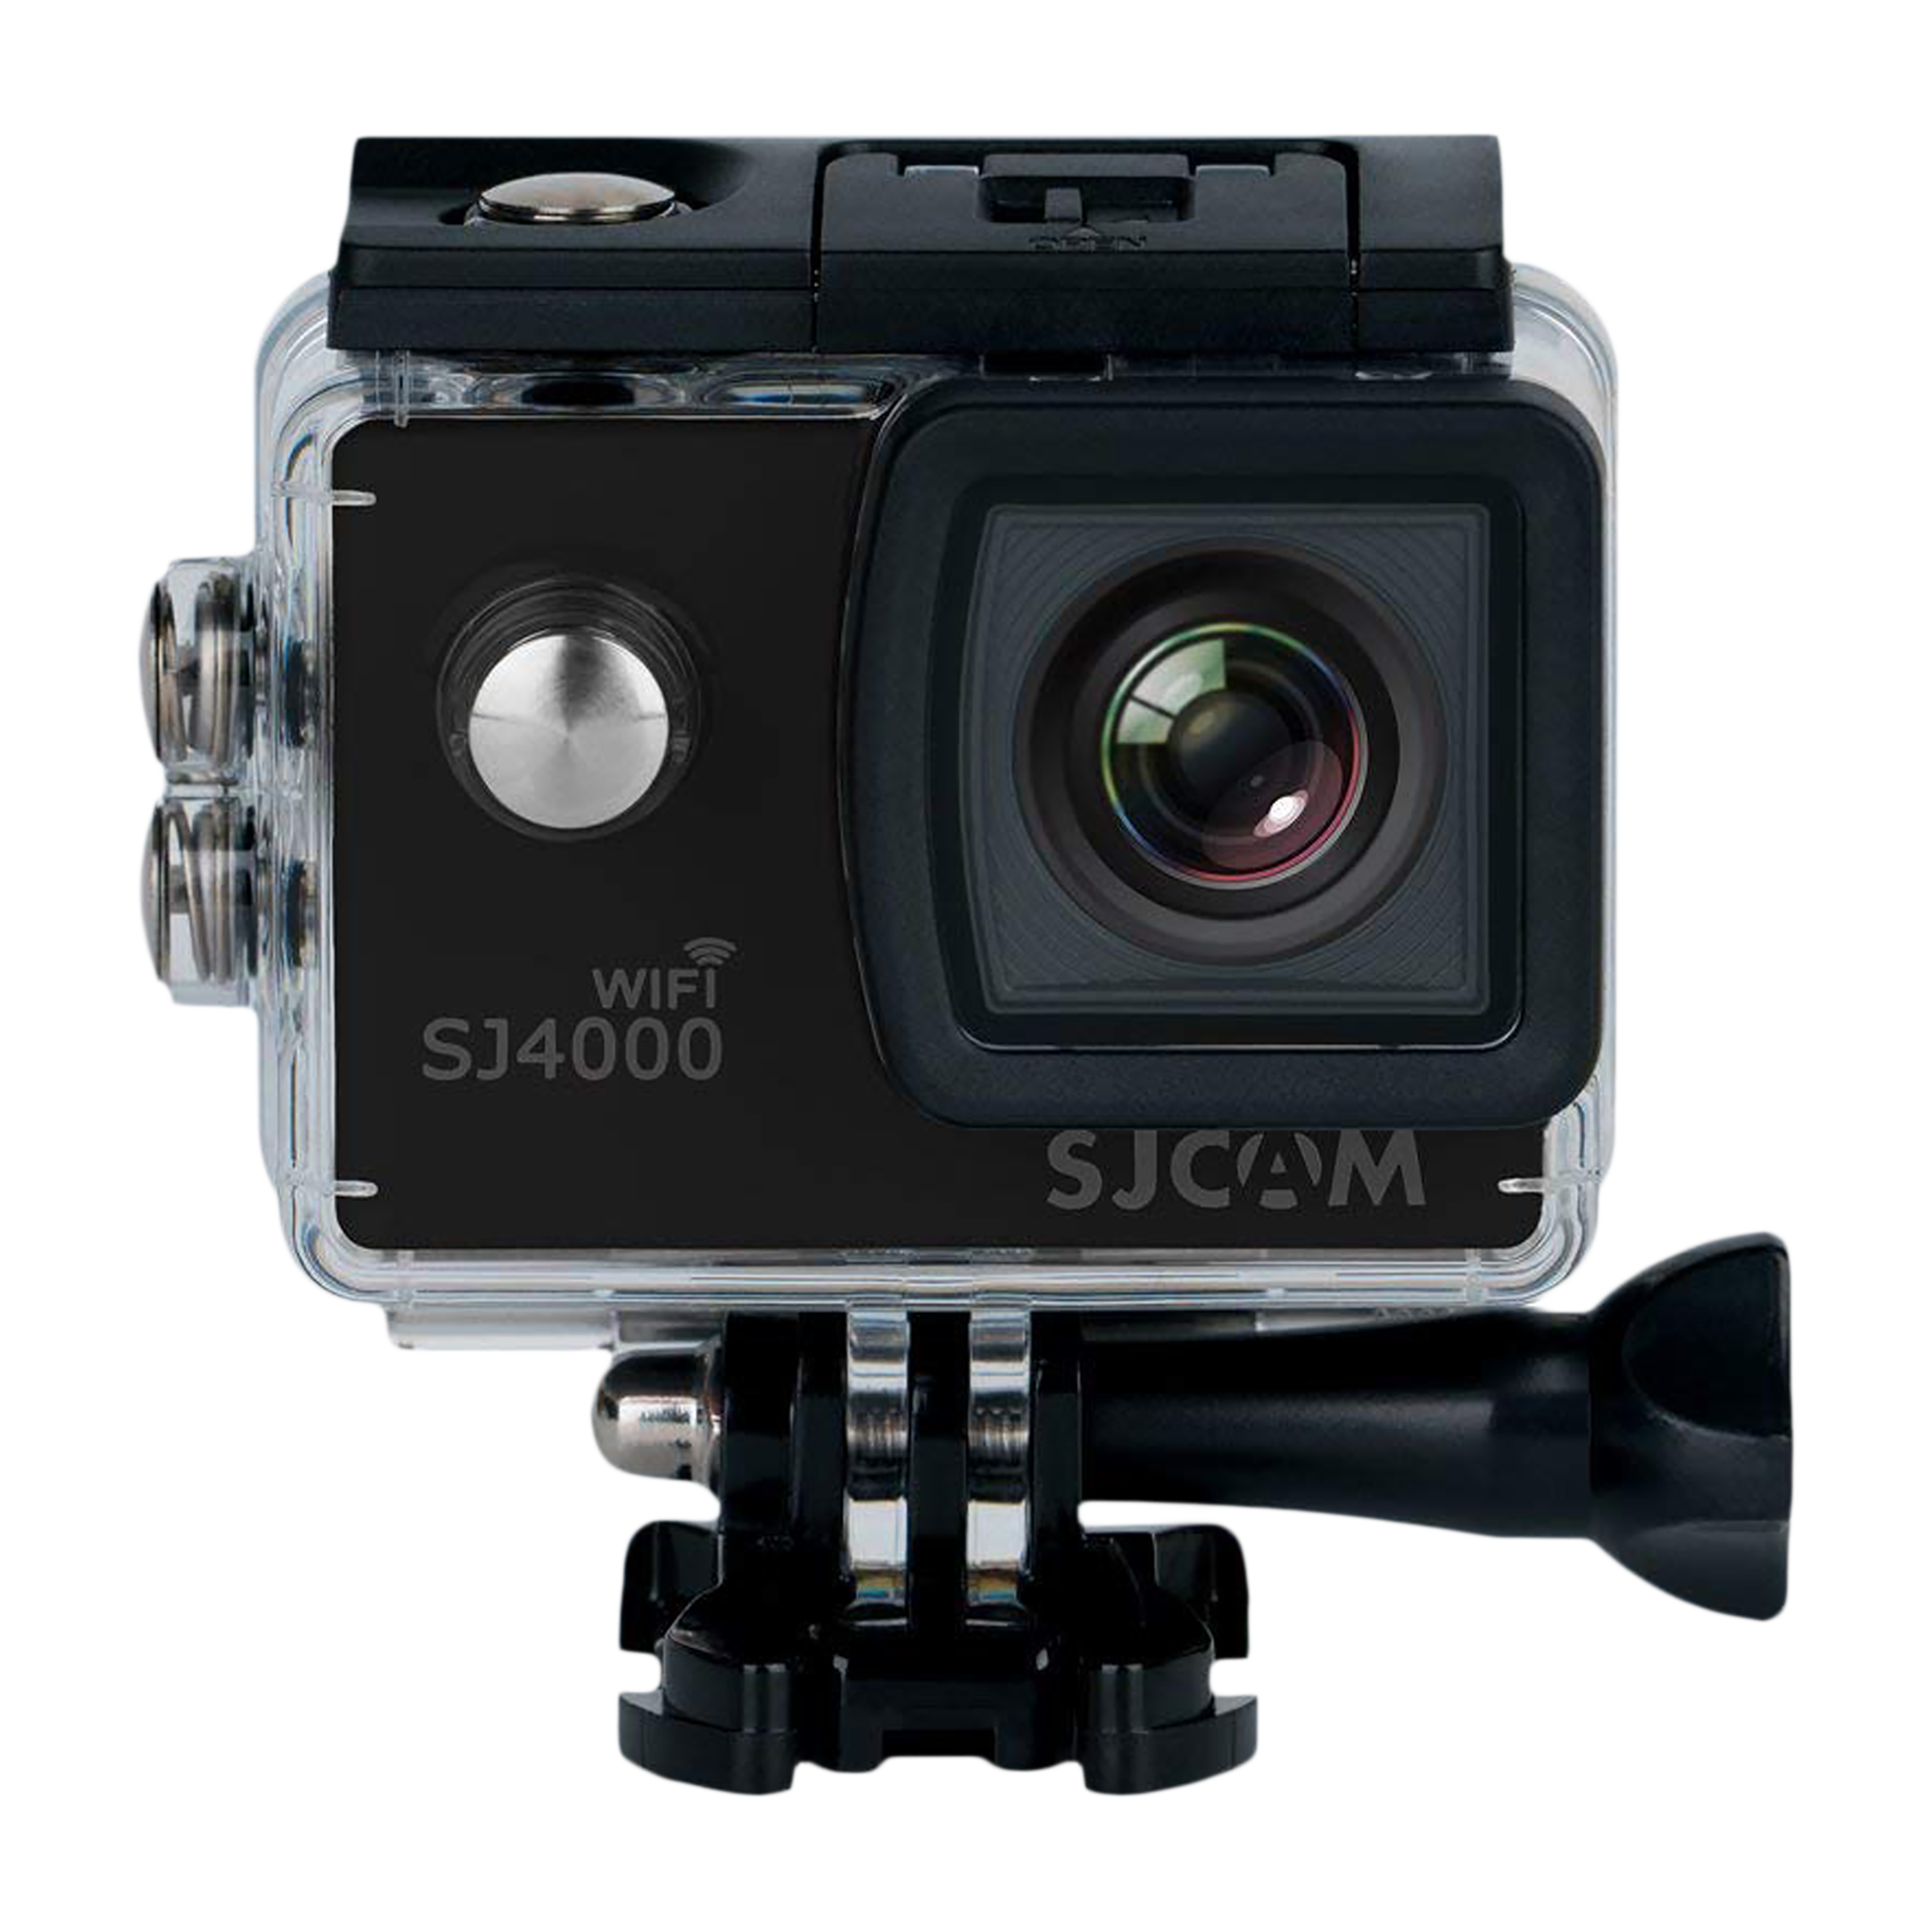 SJCAM SJ4000 4K and 12MP 30 FPS Waterproof Action Camera with 170 Degree Wide Angle (Black)